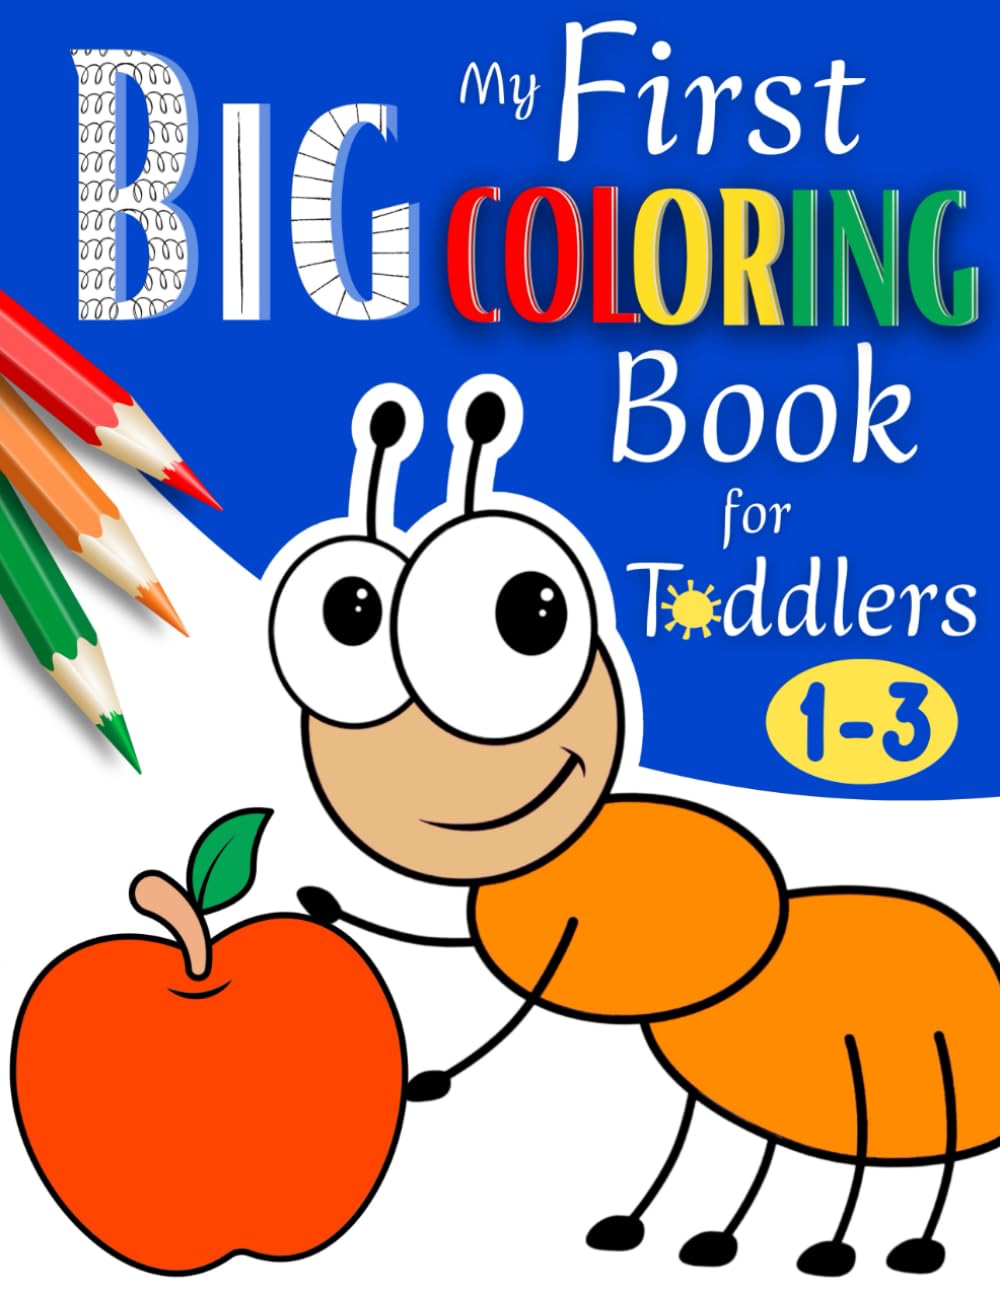 My First BIG Coloring Book for Toddlers Ages 1-3: Over 100 BIG and Simple Images Featuring Bolt Line | Cute Animals, Fruits, Vehicles and Everyday ... For Children Ages 1, 2 & 3 (US Edition)